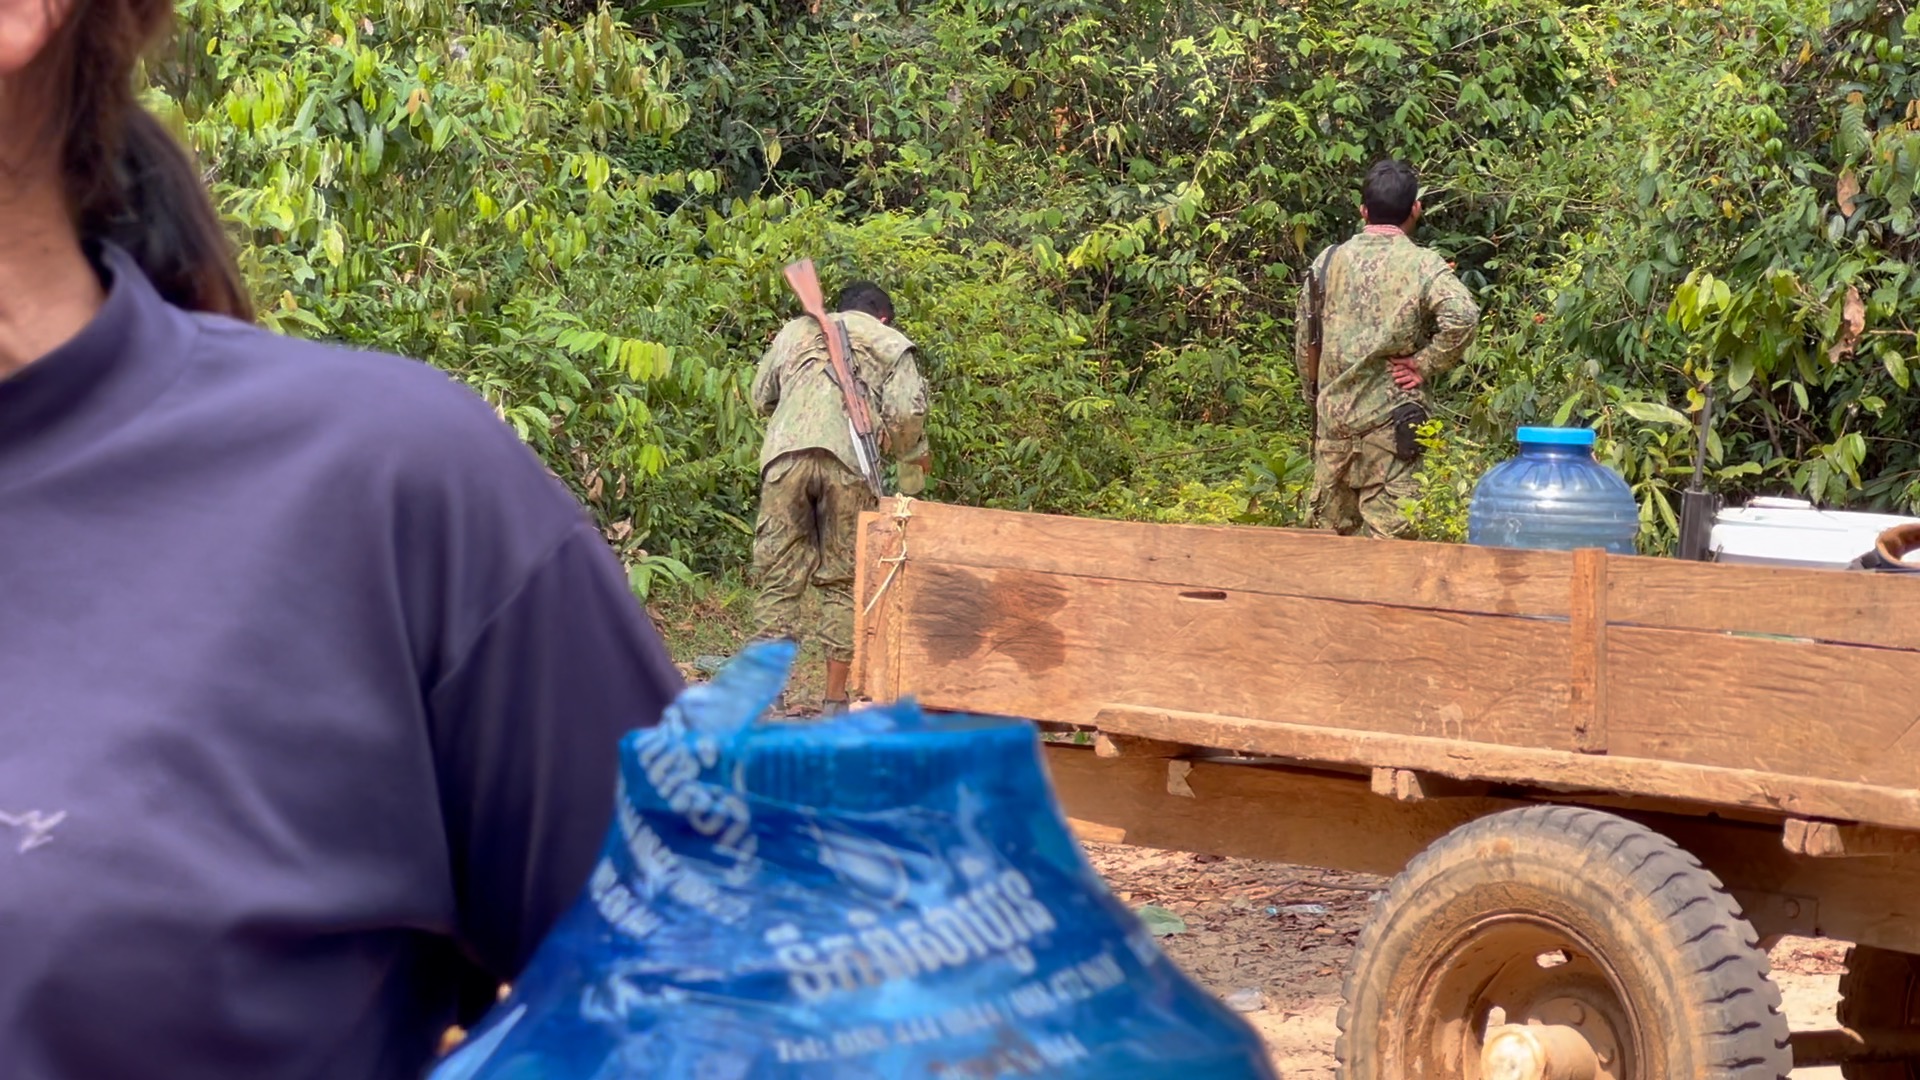 Armed rangers working for the Ministry of Environment pursued the community through Chhaeb-Preah Roka Wildlife Sanctuary in April 2023. Image by Chasing Deforestation / Mongabay.